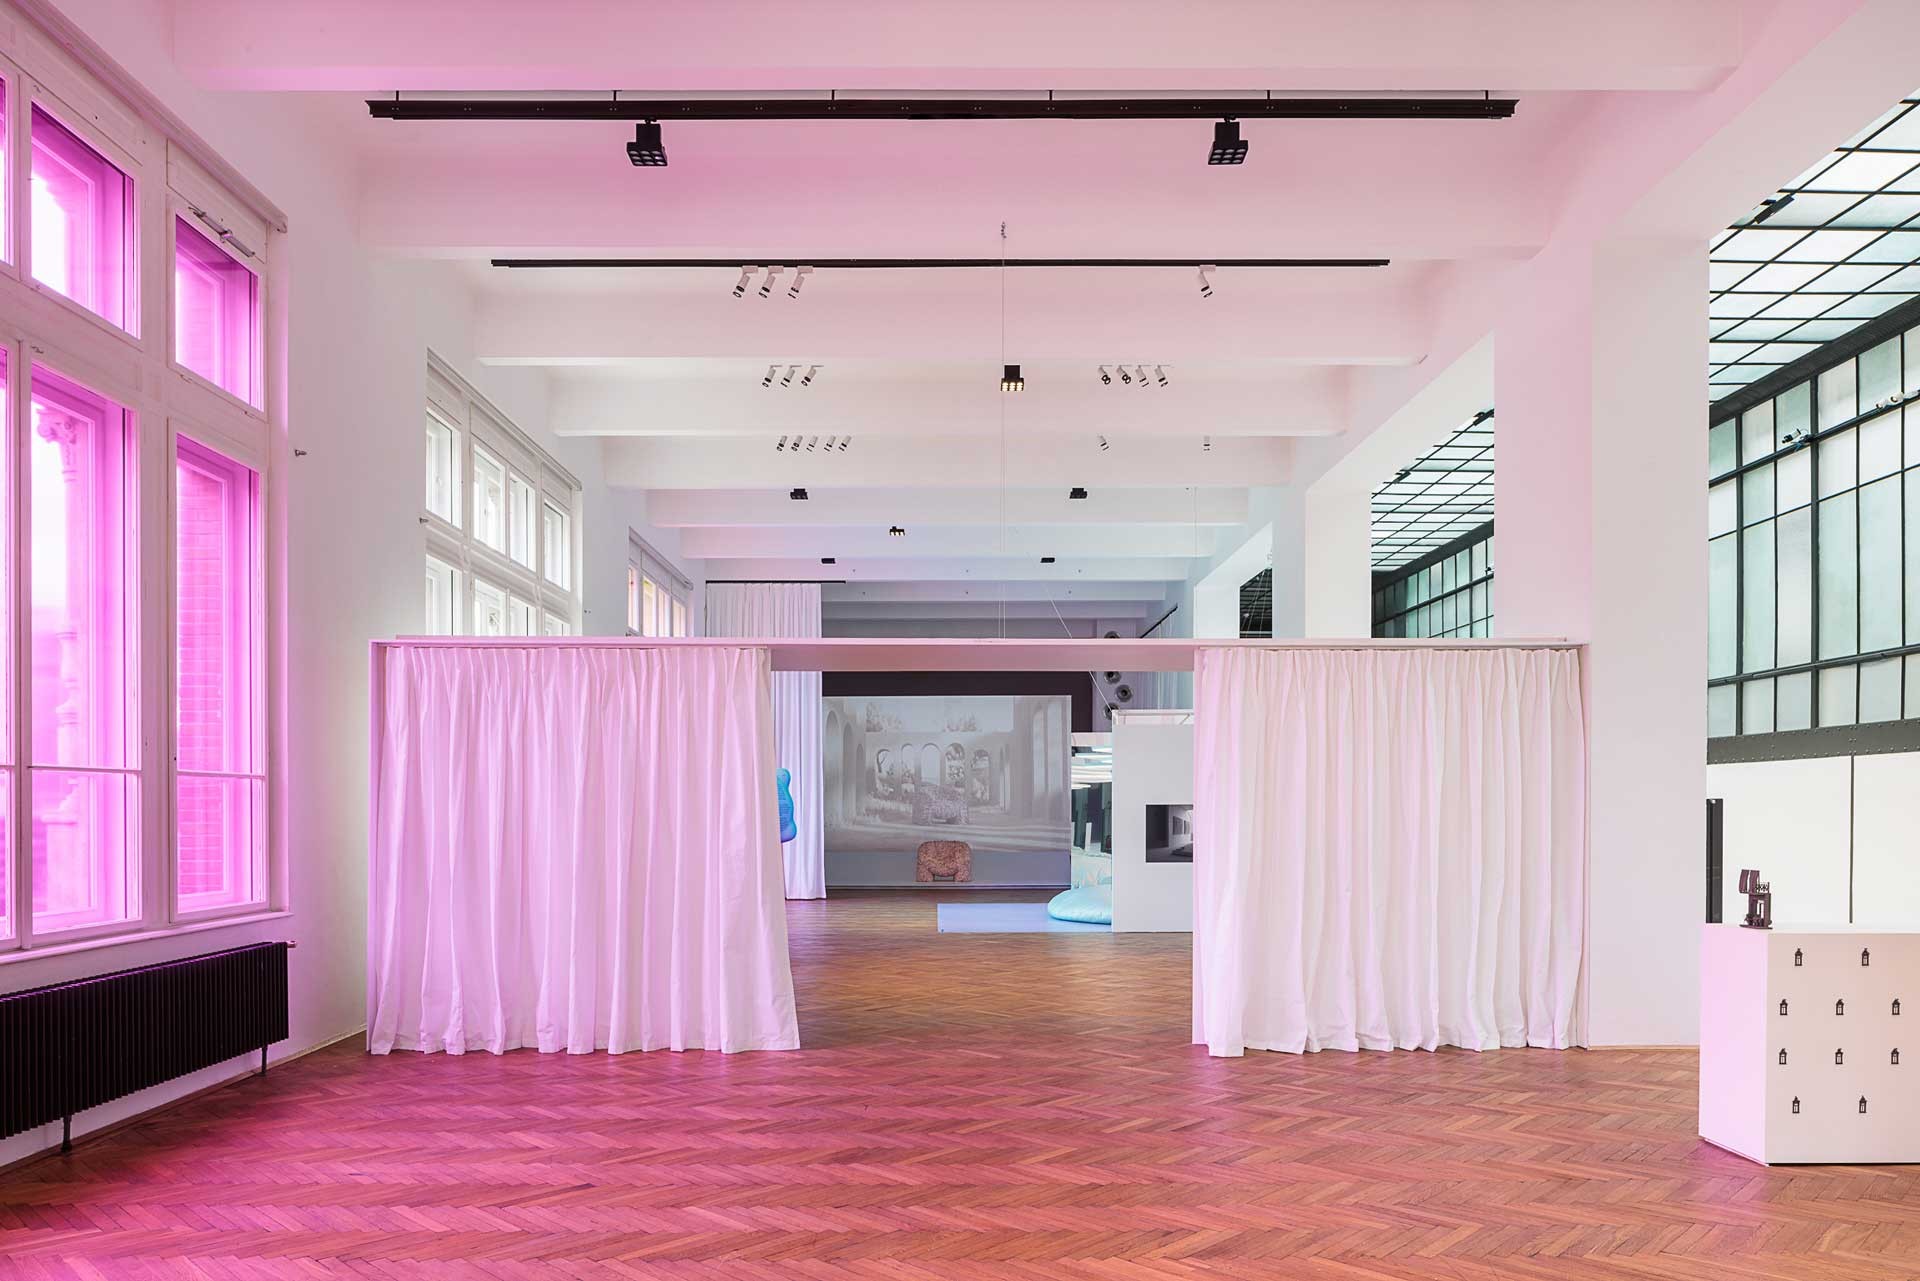 Exhibition hall bathed in pink light